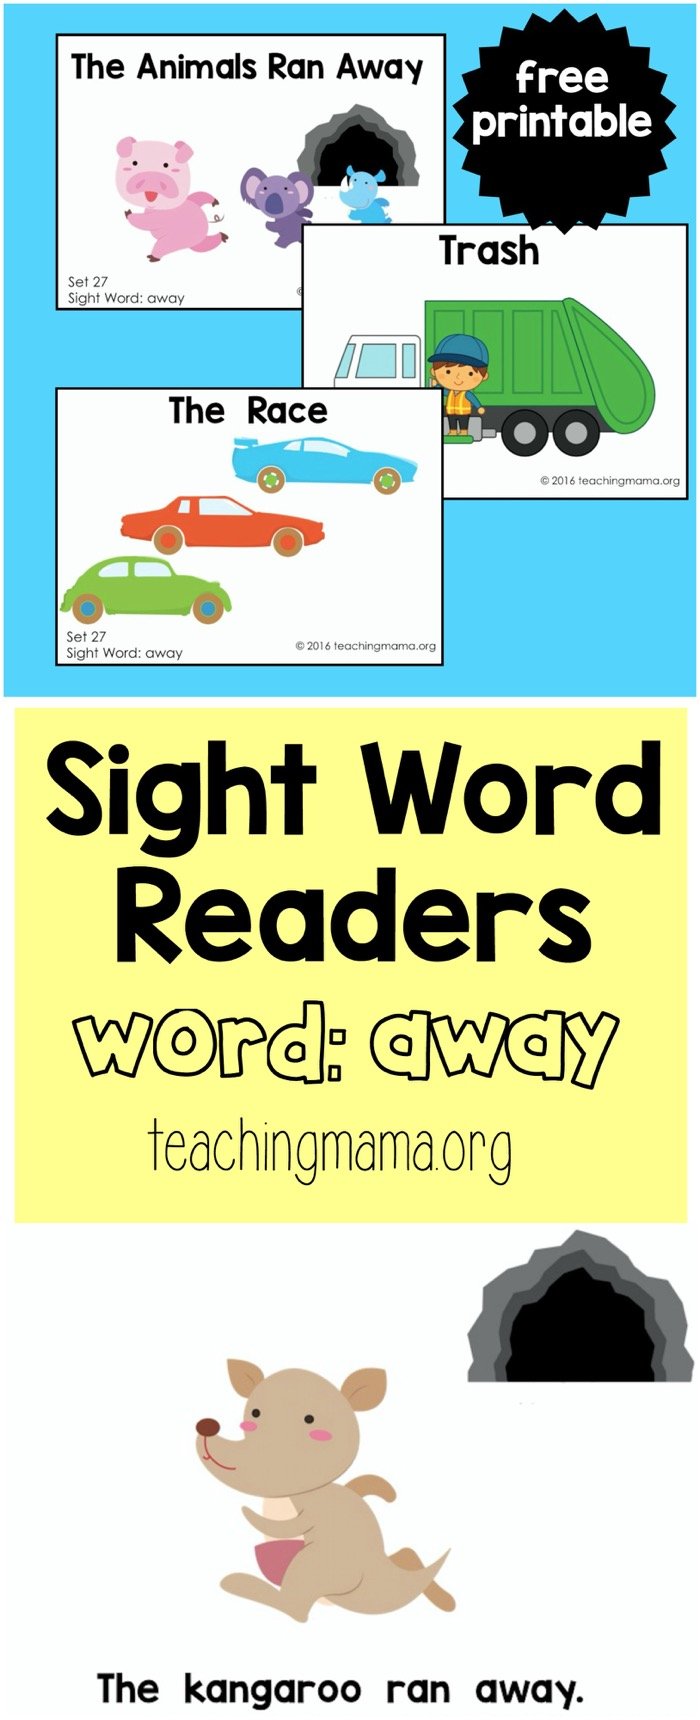 Sight Word Readers for the Word "Away"